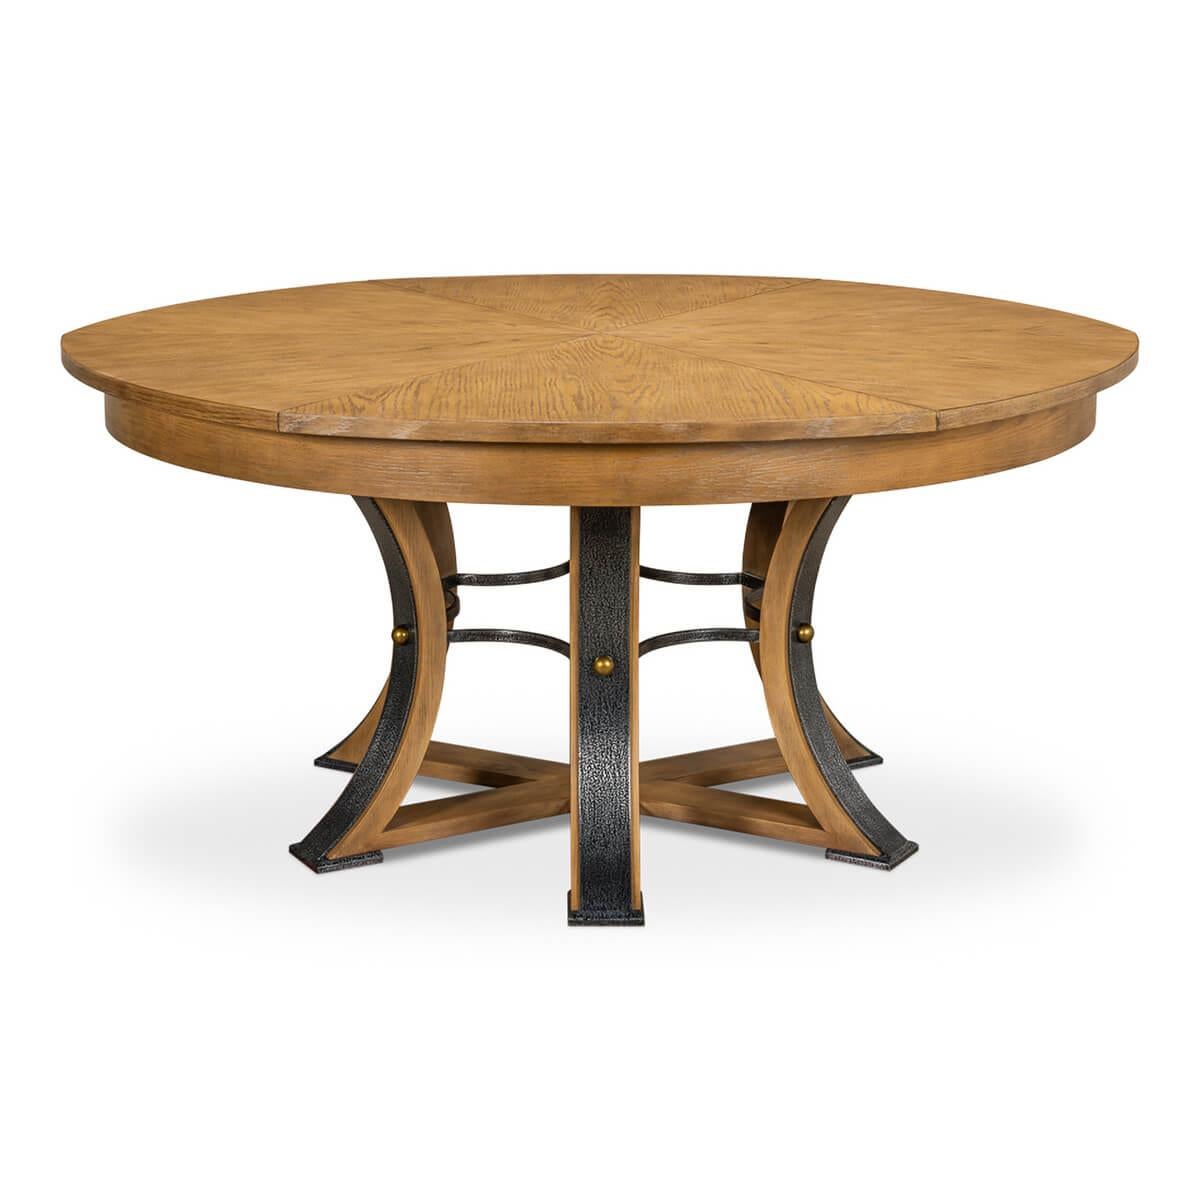 A modern industrial style extension dining table with a wire-brushed oak finish top, the Jupe form self-storing leaves on a six-sided pedestal base with hammered iron mounts to each leg.

Open dimensions: 84